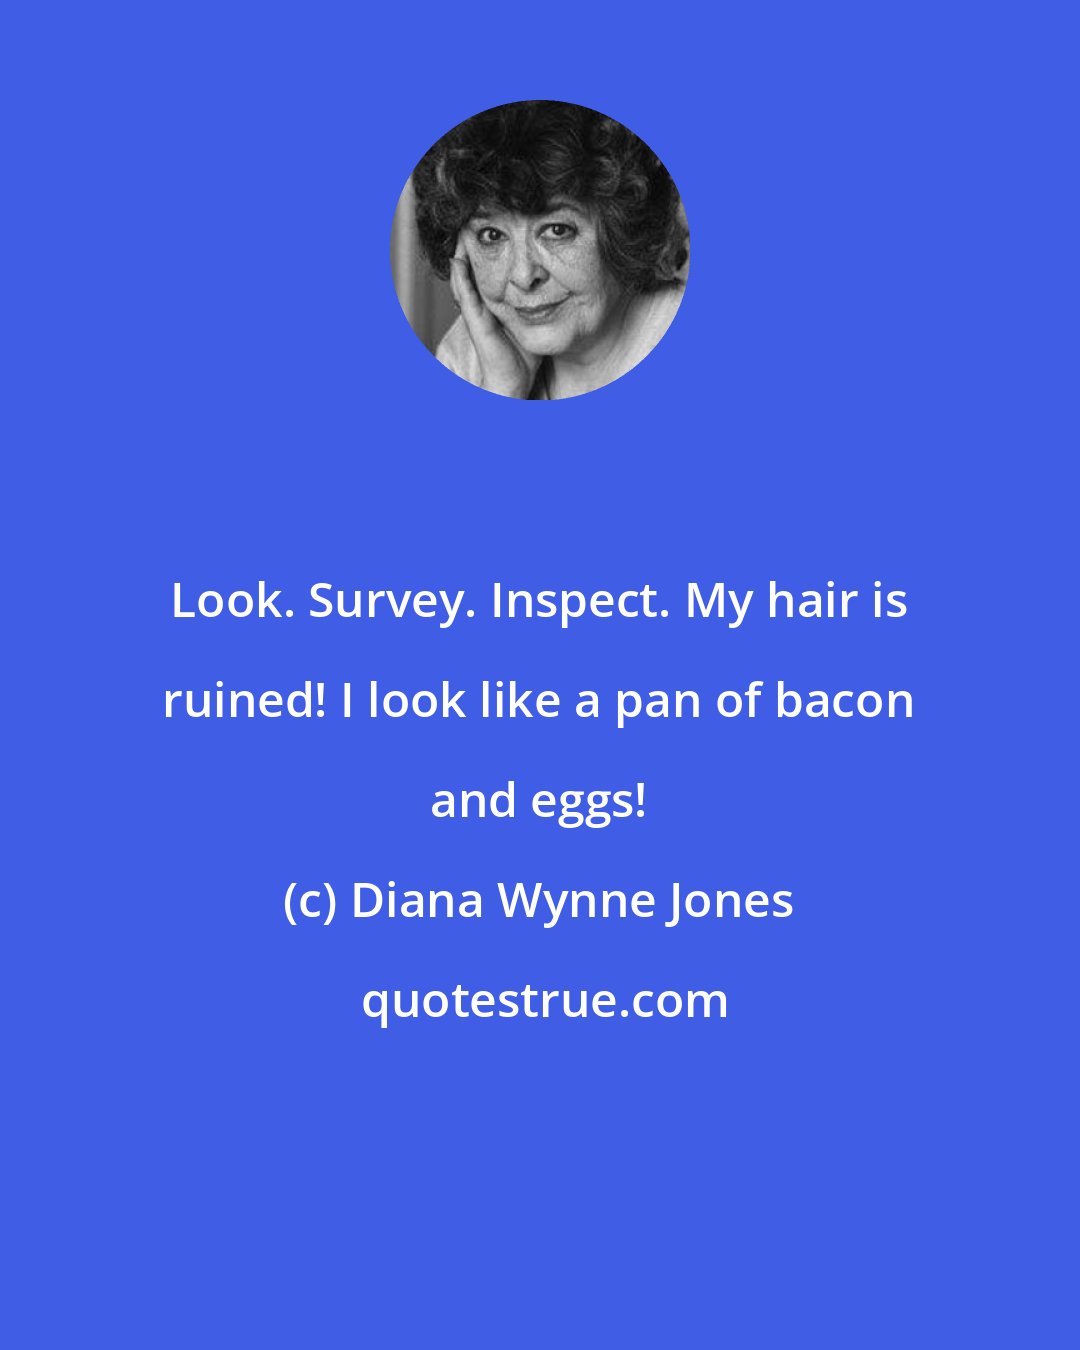 Diana Wynne Jones: Look. Survey. Inspect. My hair is ruined! I look like a pan of bacon and eggs!